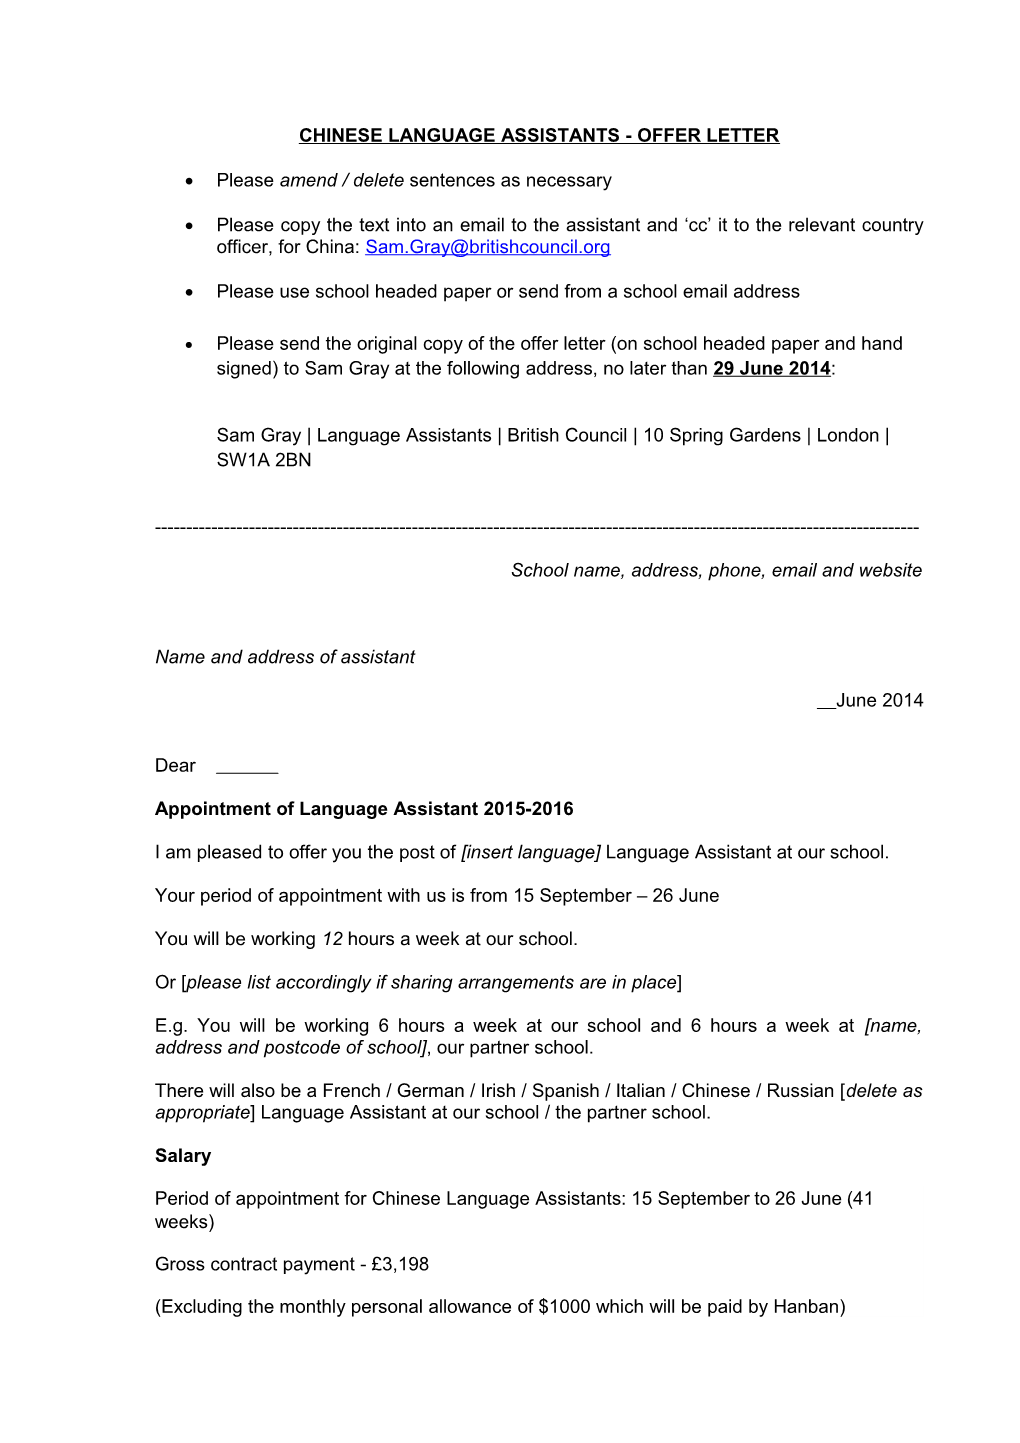 Chinese Language Assistants - Offer Letter